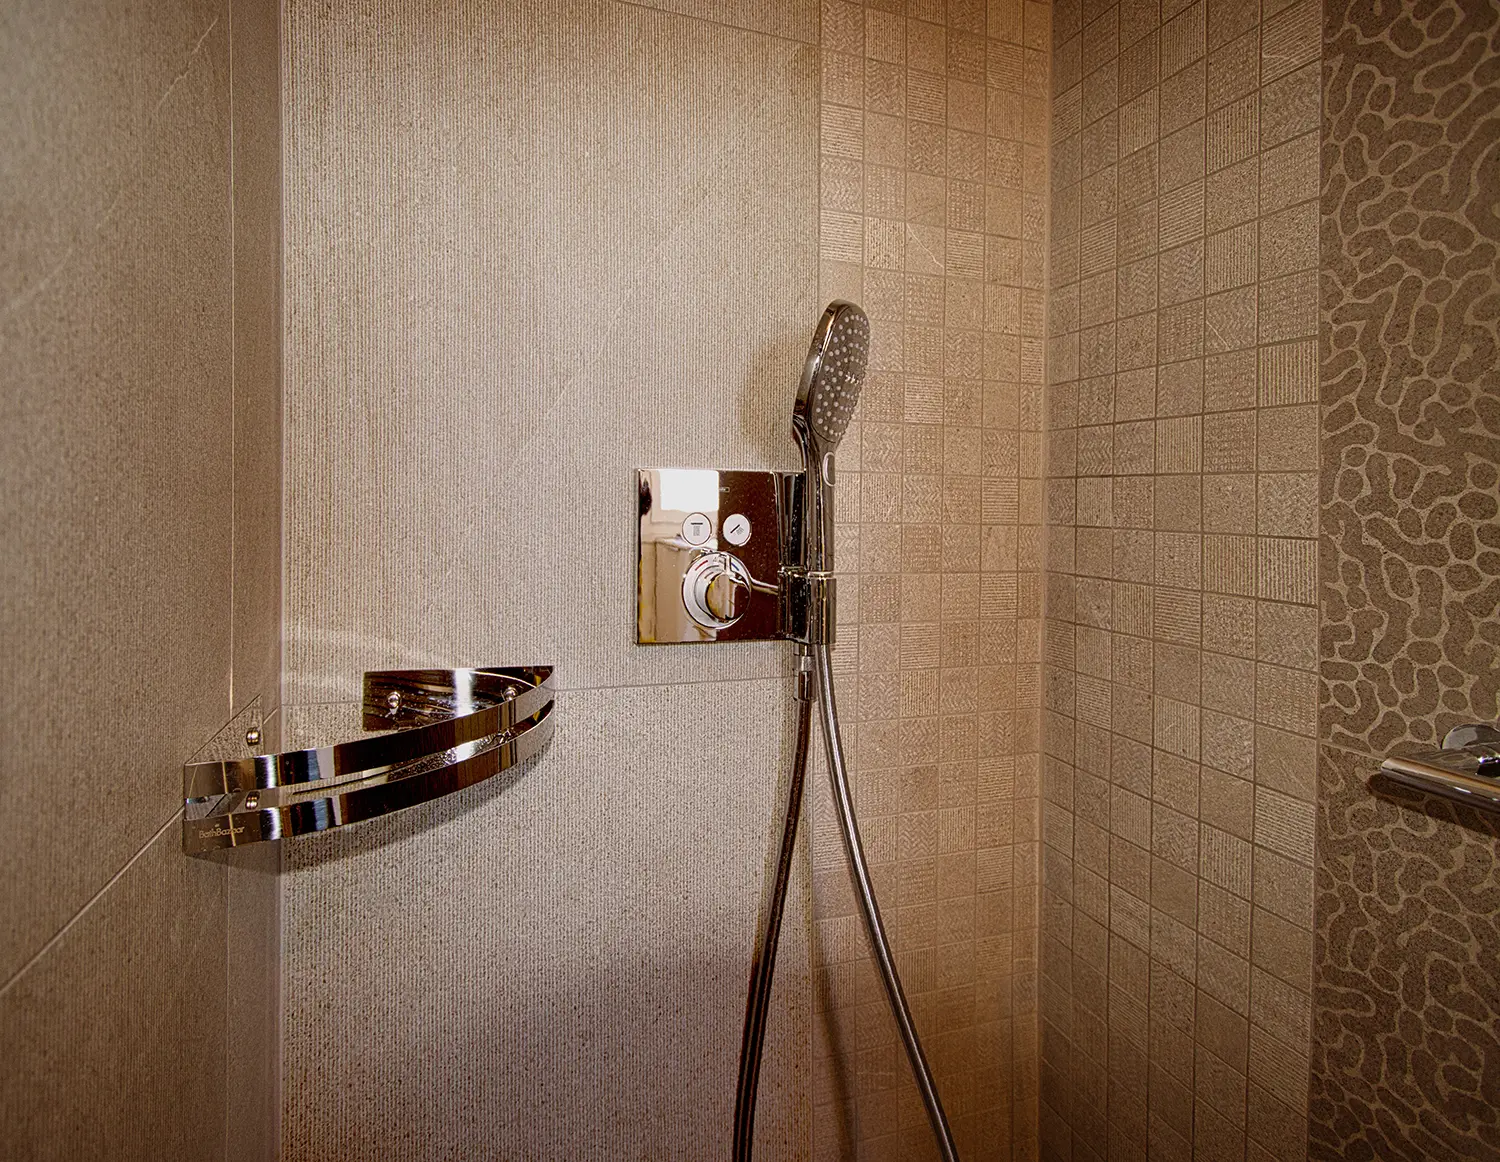 Detail photo of the shower cladding and accessories; renovation project by Elles Interior Design.